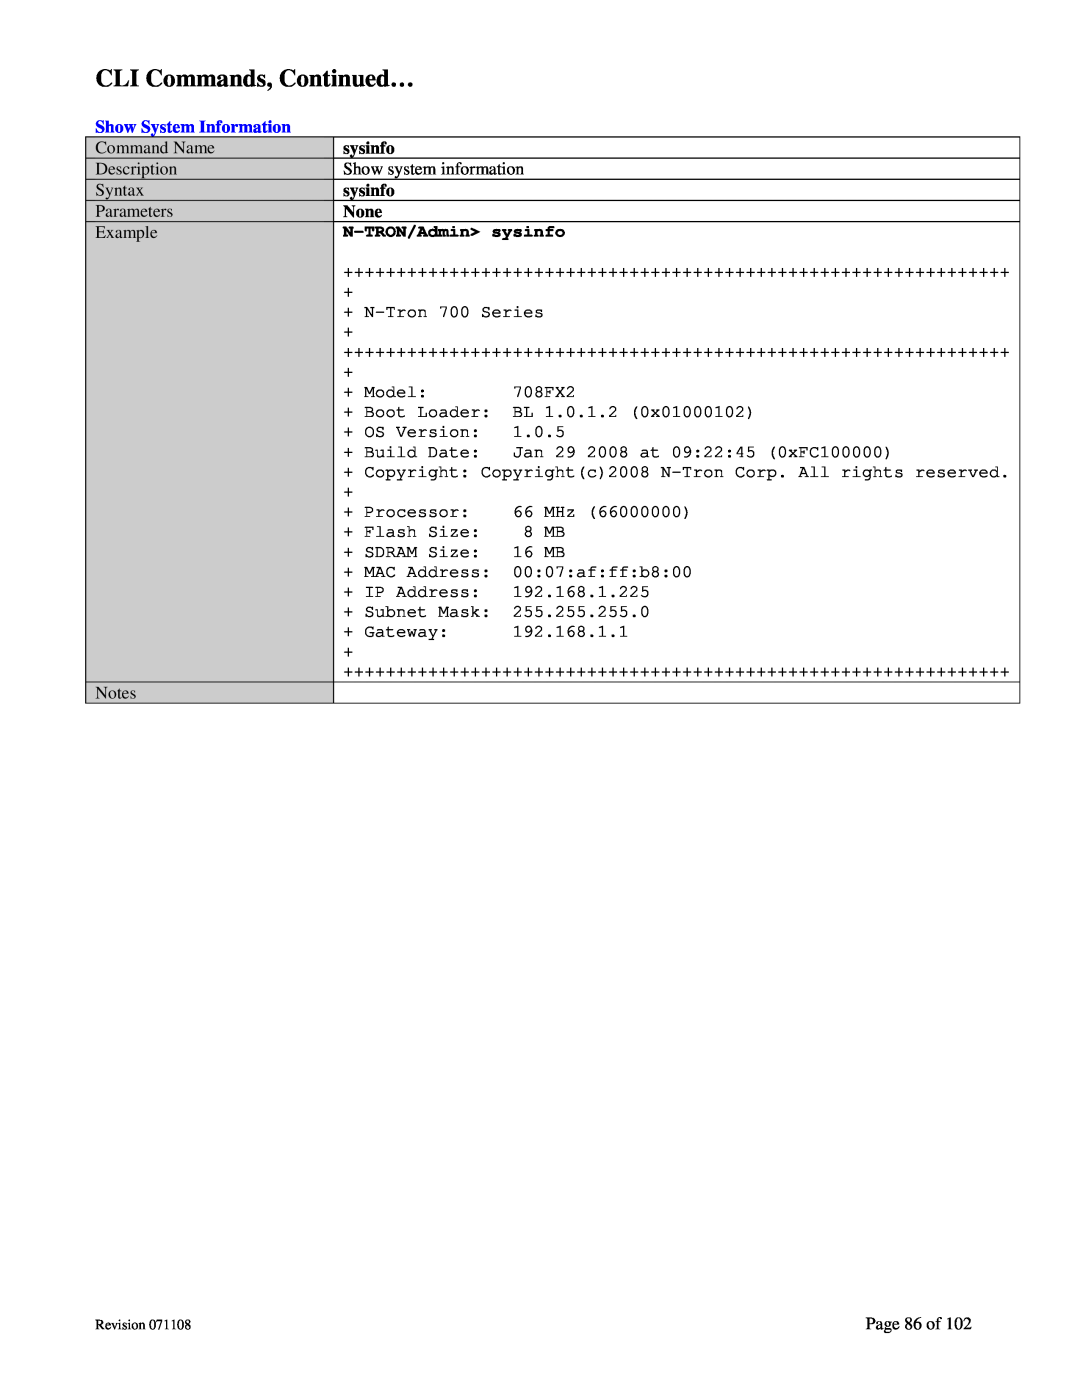 N-Tron 708M12 user manual CLI Commands, Continued…, Show System Information, N-TRON/Admin sysinfo 